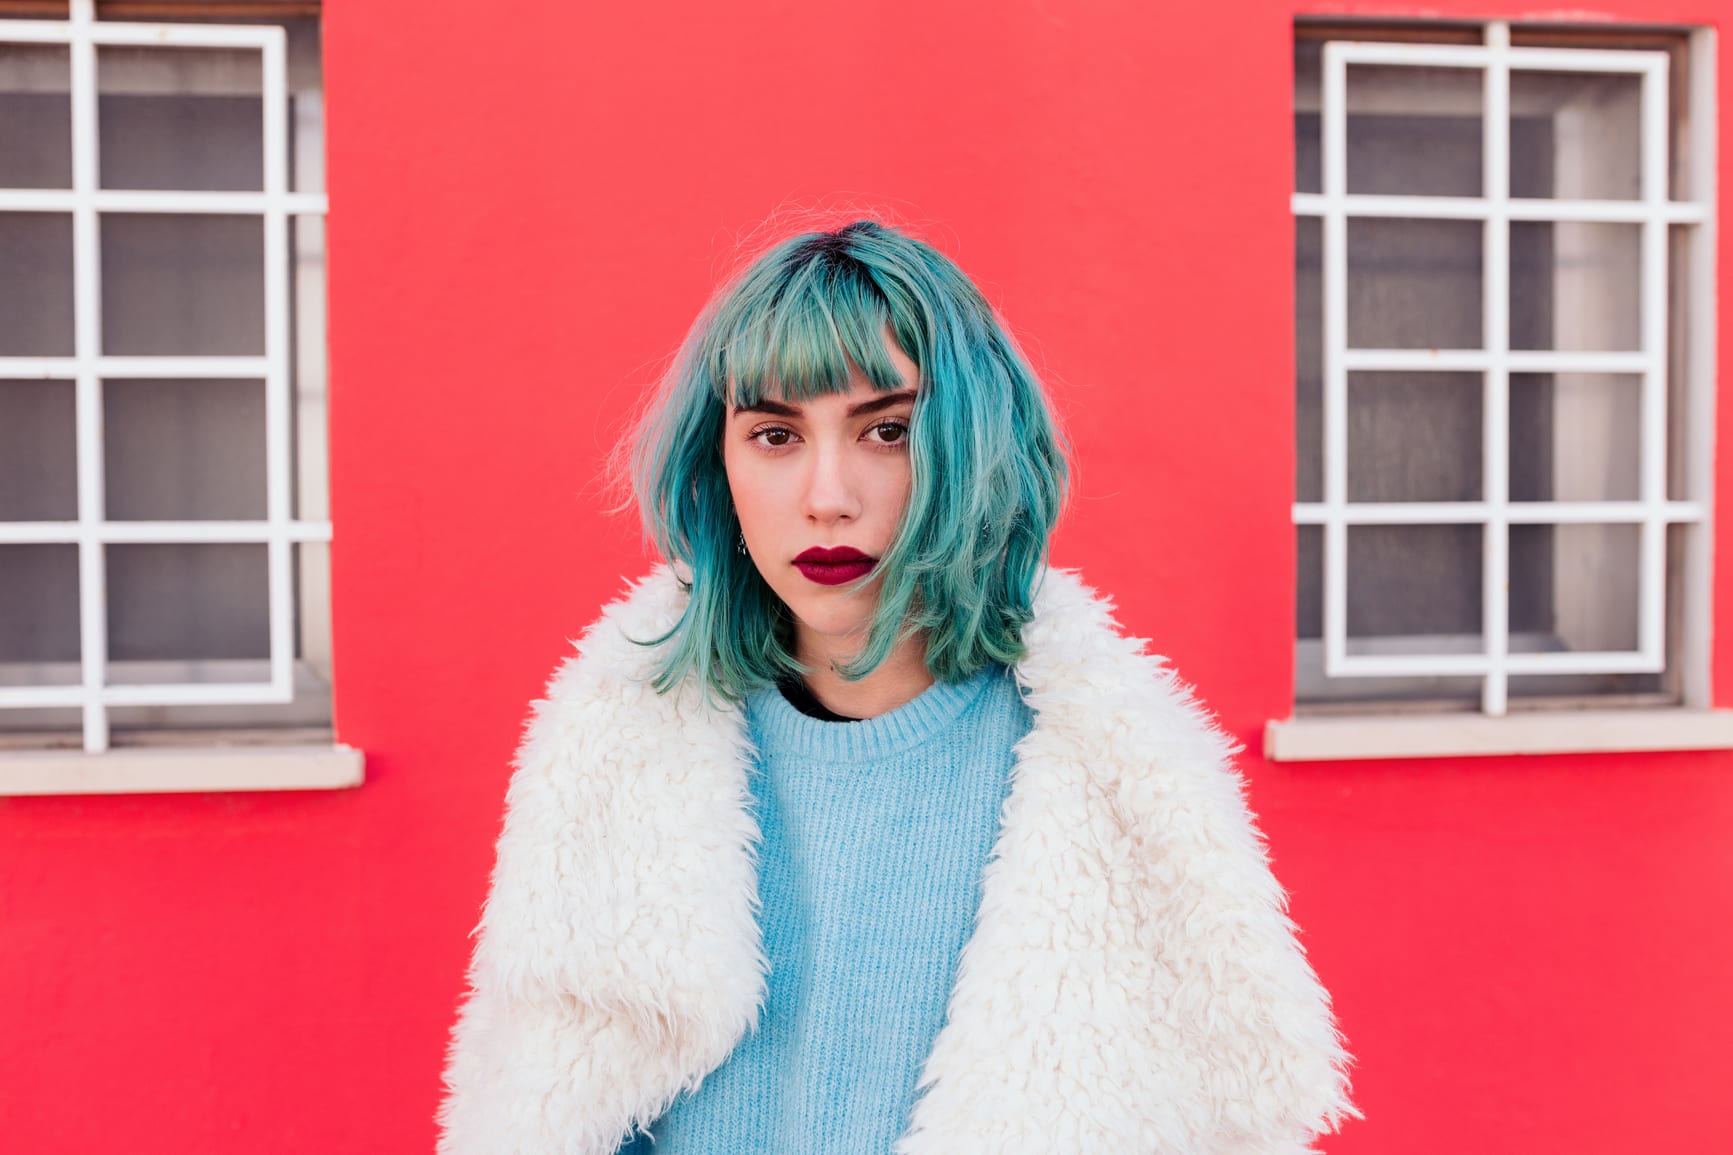 Cool young woman with blue hair wearing a white coat and looking at the camera with confidence. Red background behind.